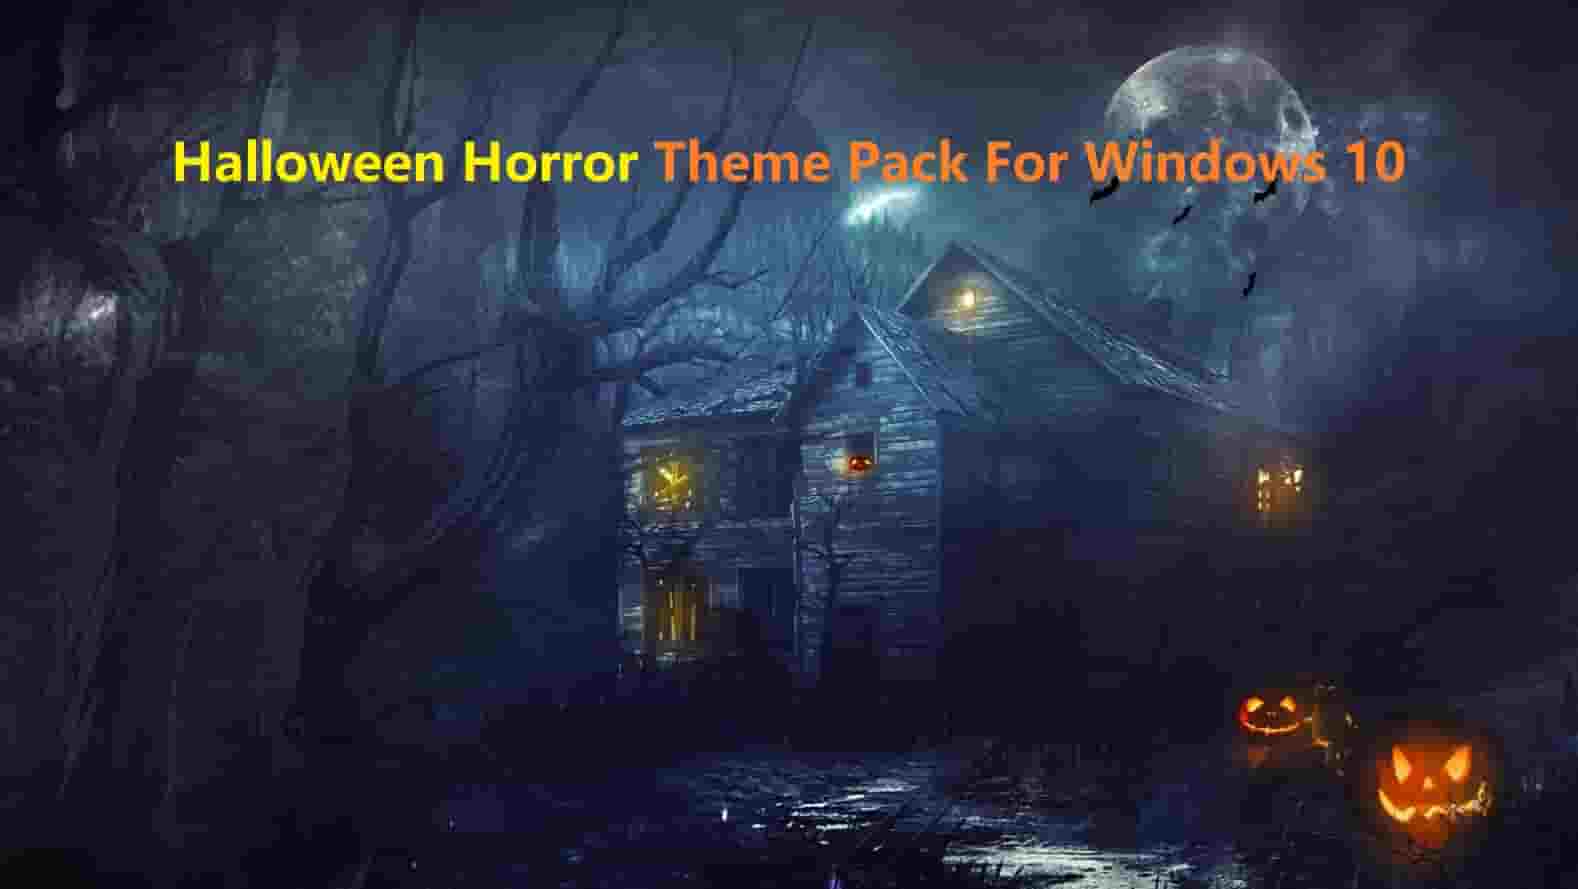 Halloween Horror Scary Theme for Windows 10 Free Download 2021